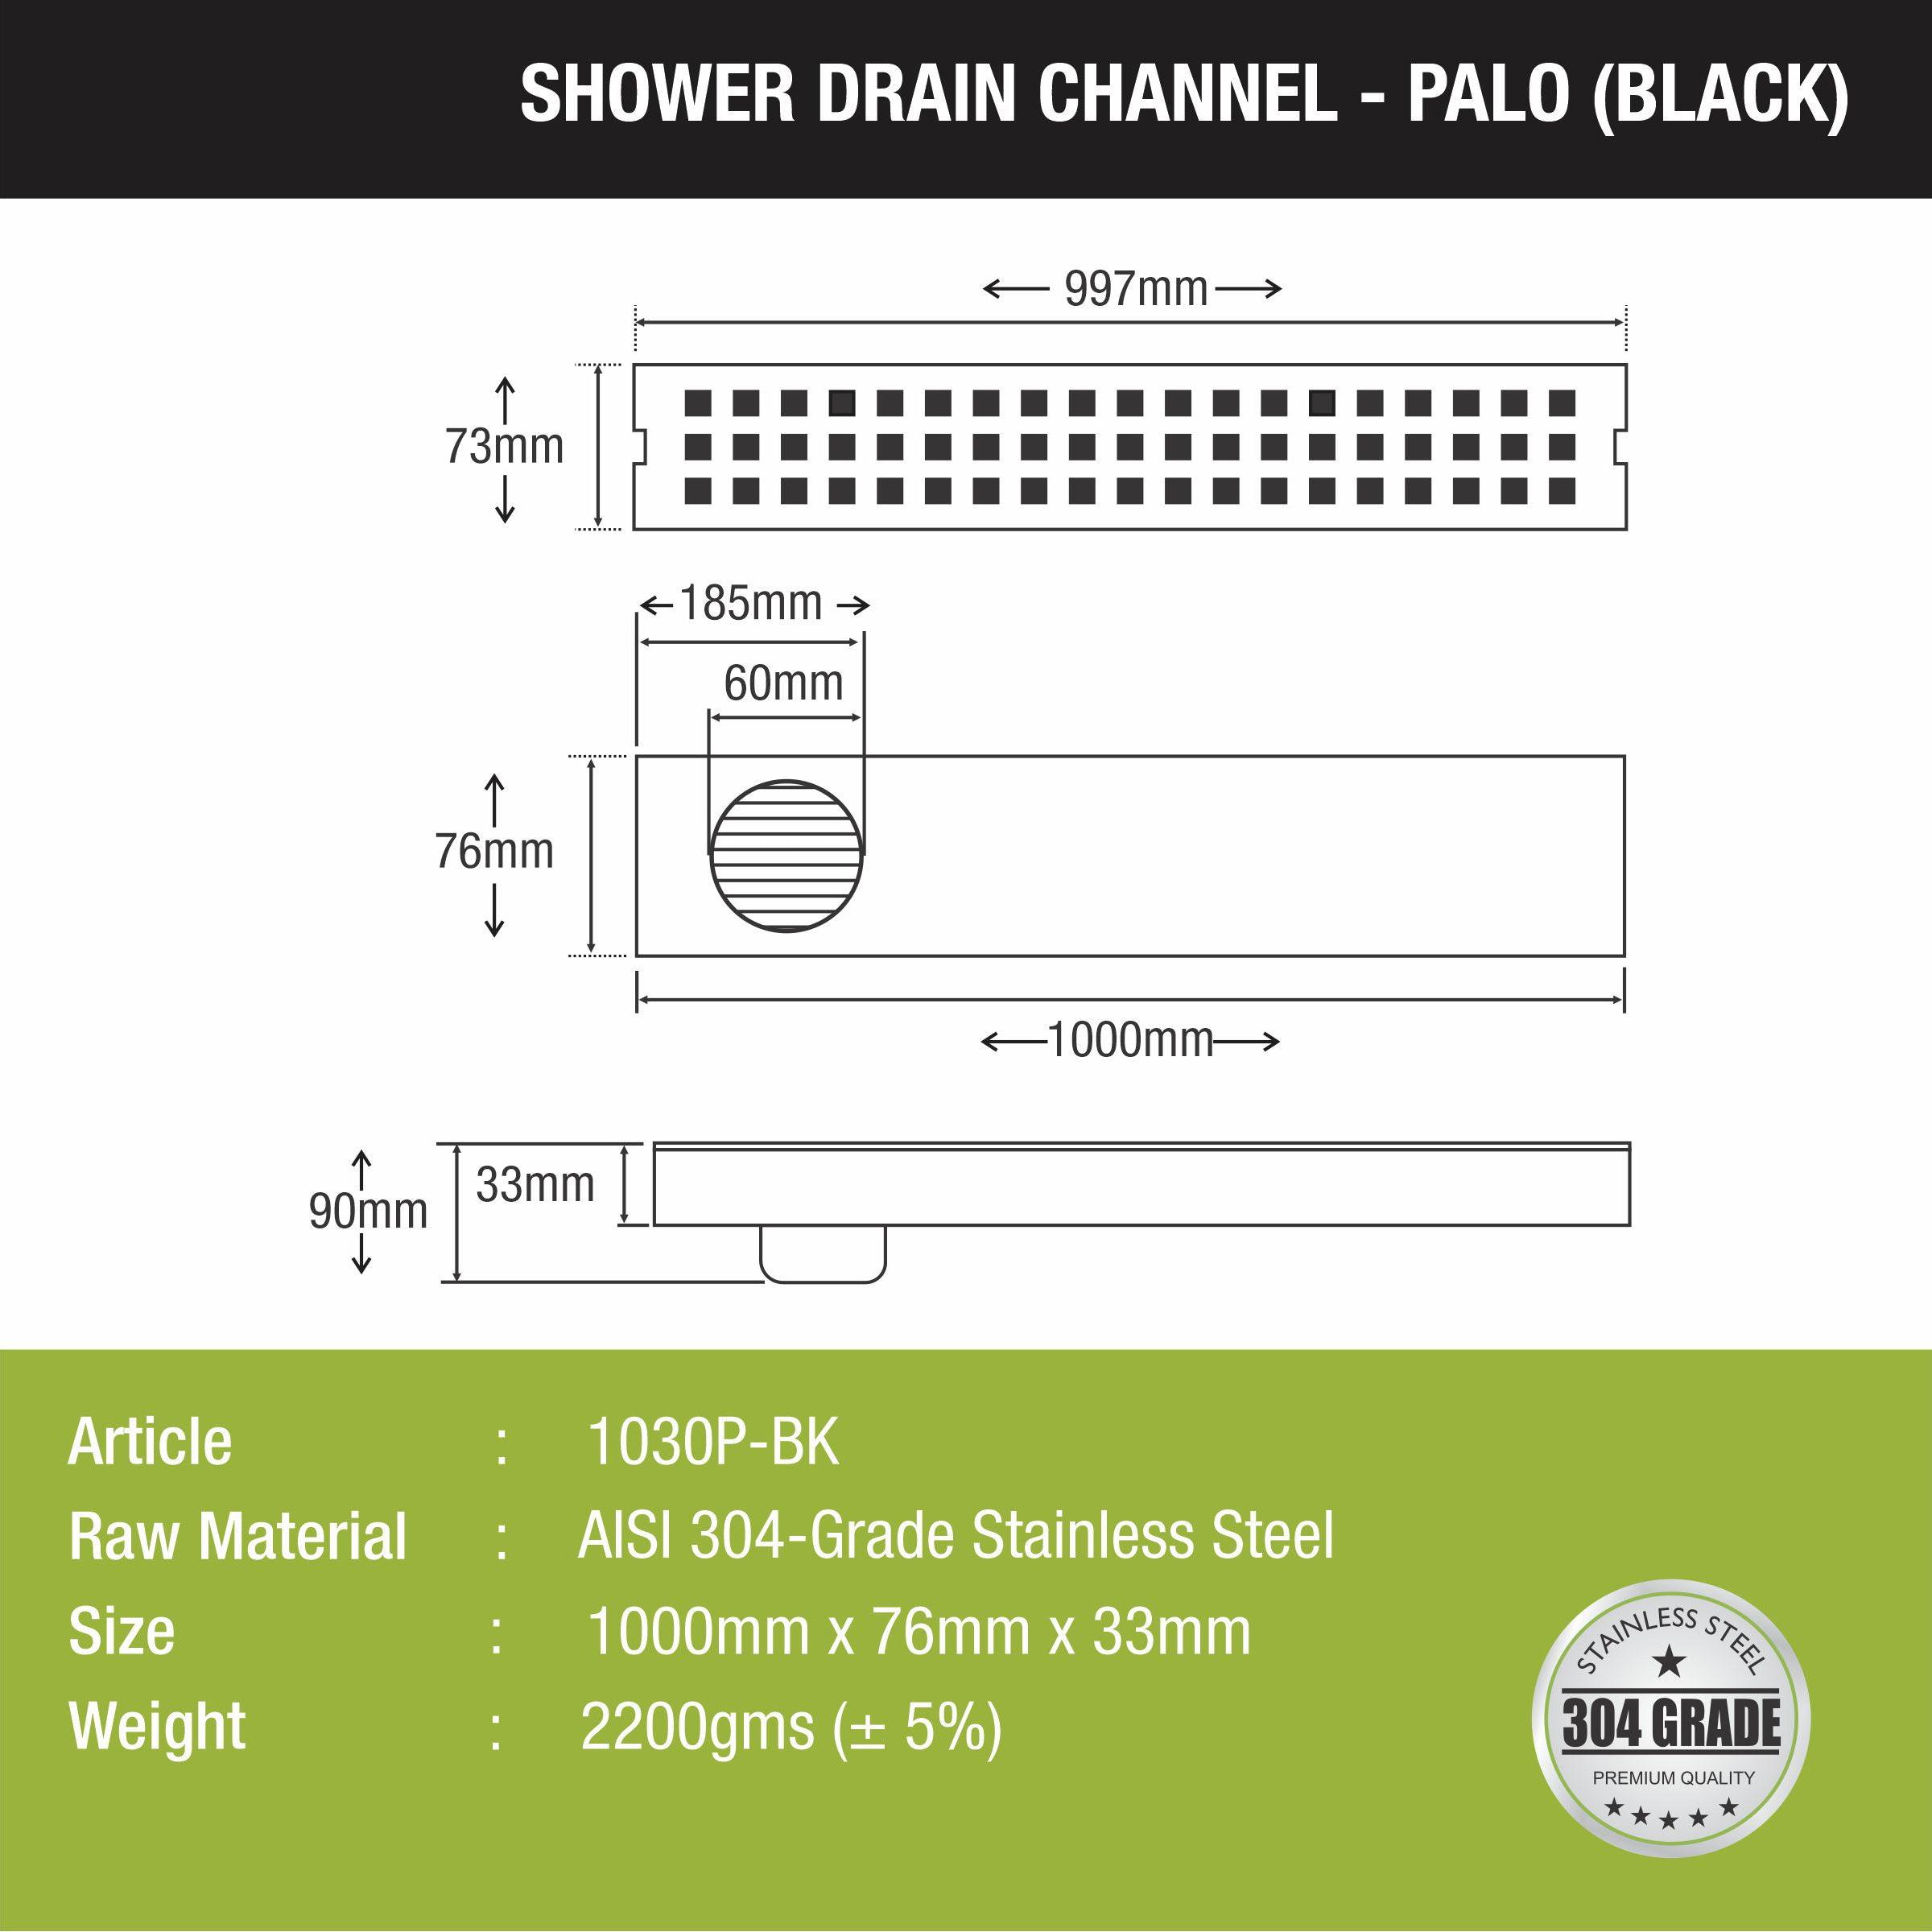 Palo Shower Drain Channel - Black (40 x 3 Inches) size and measurement